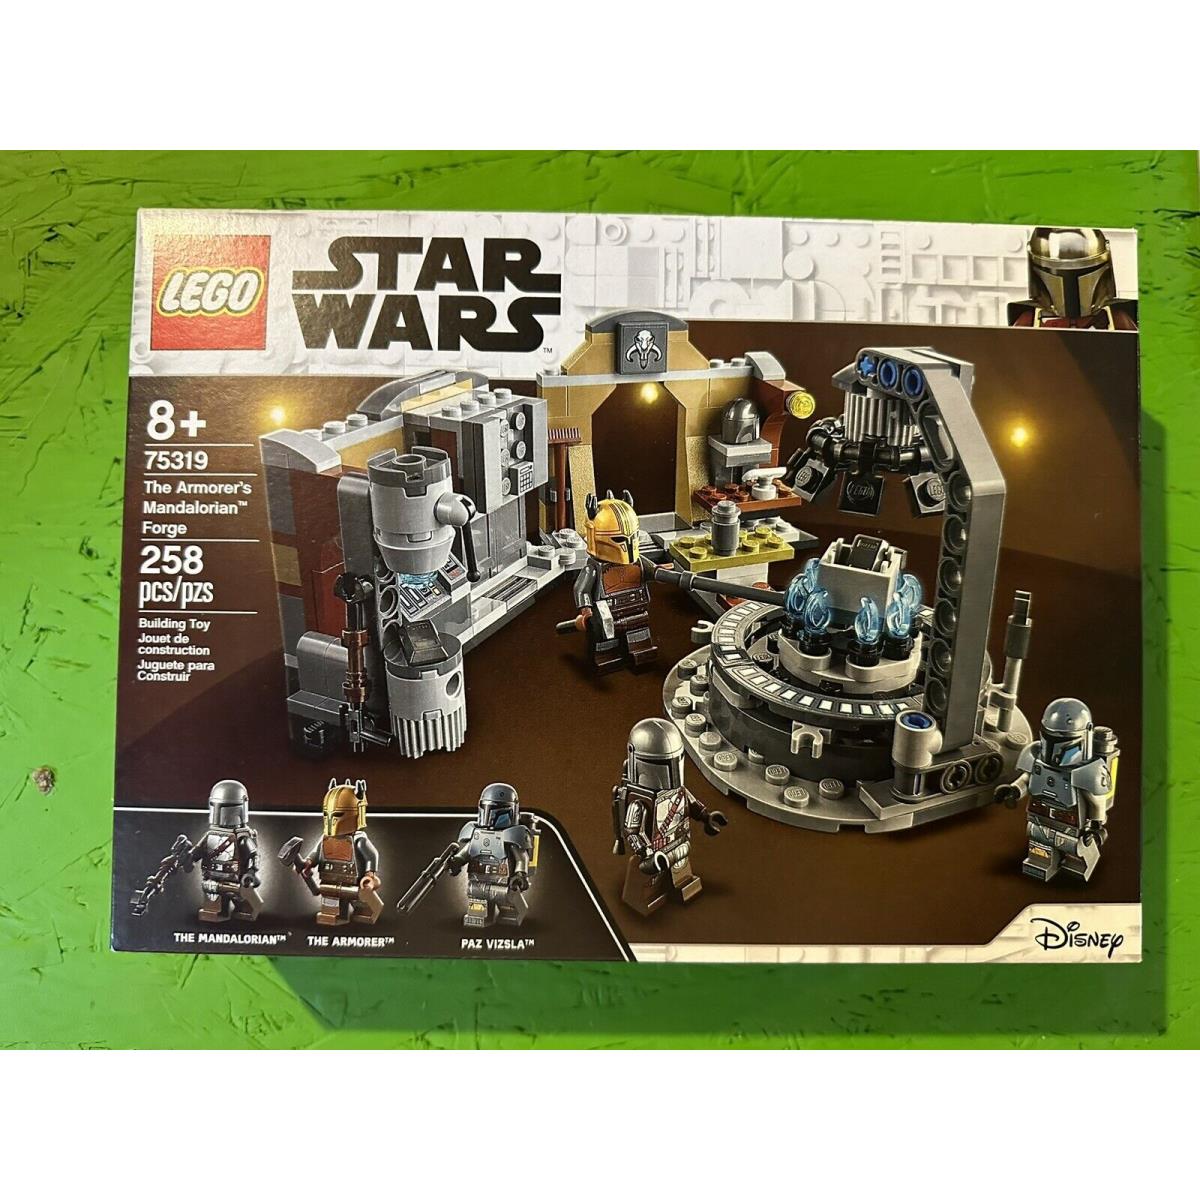 Lego Star Wars 75319 The Armorer`s Mandalorian Forge New/sealed Retired